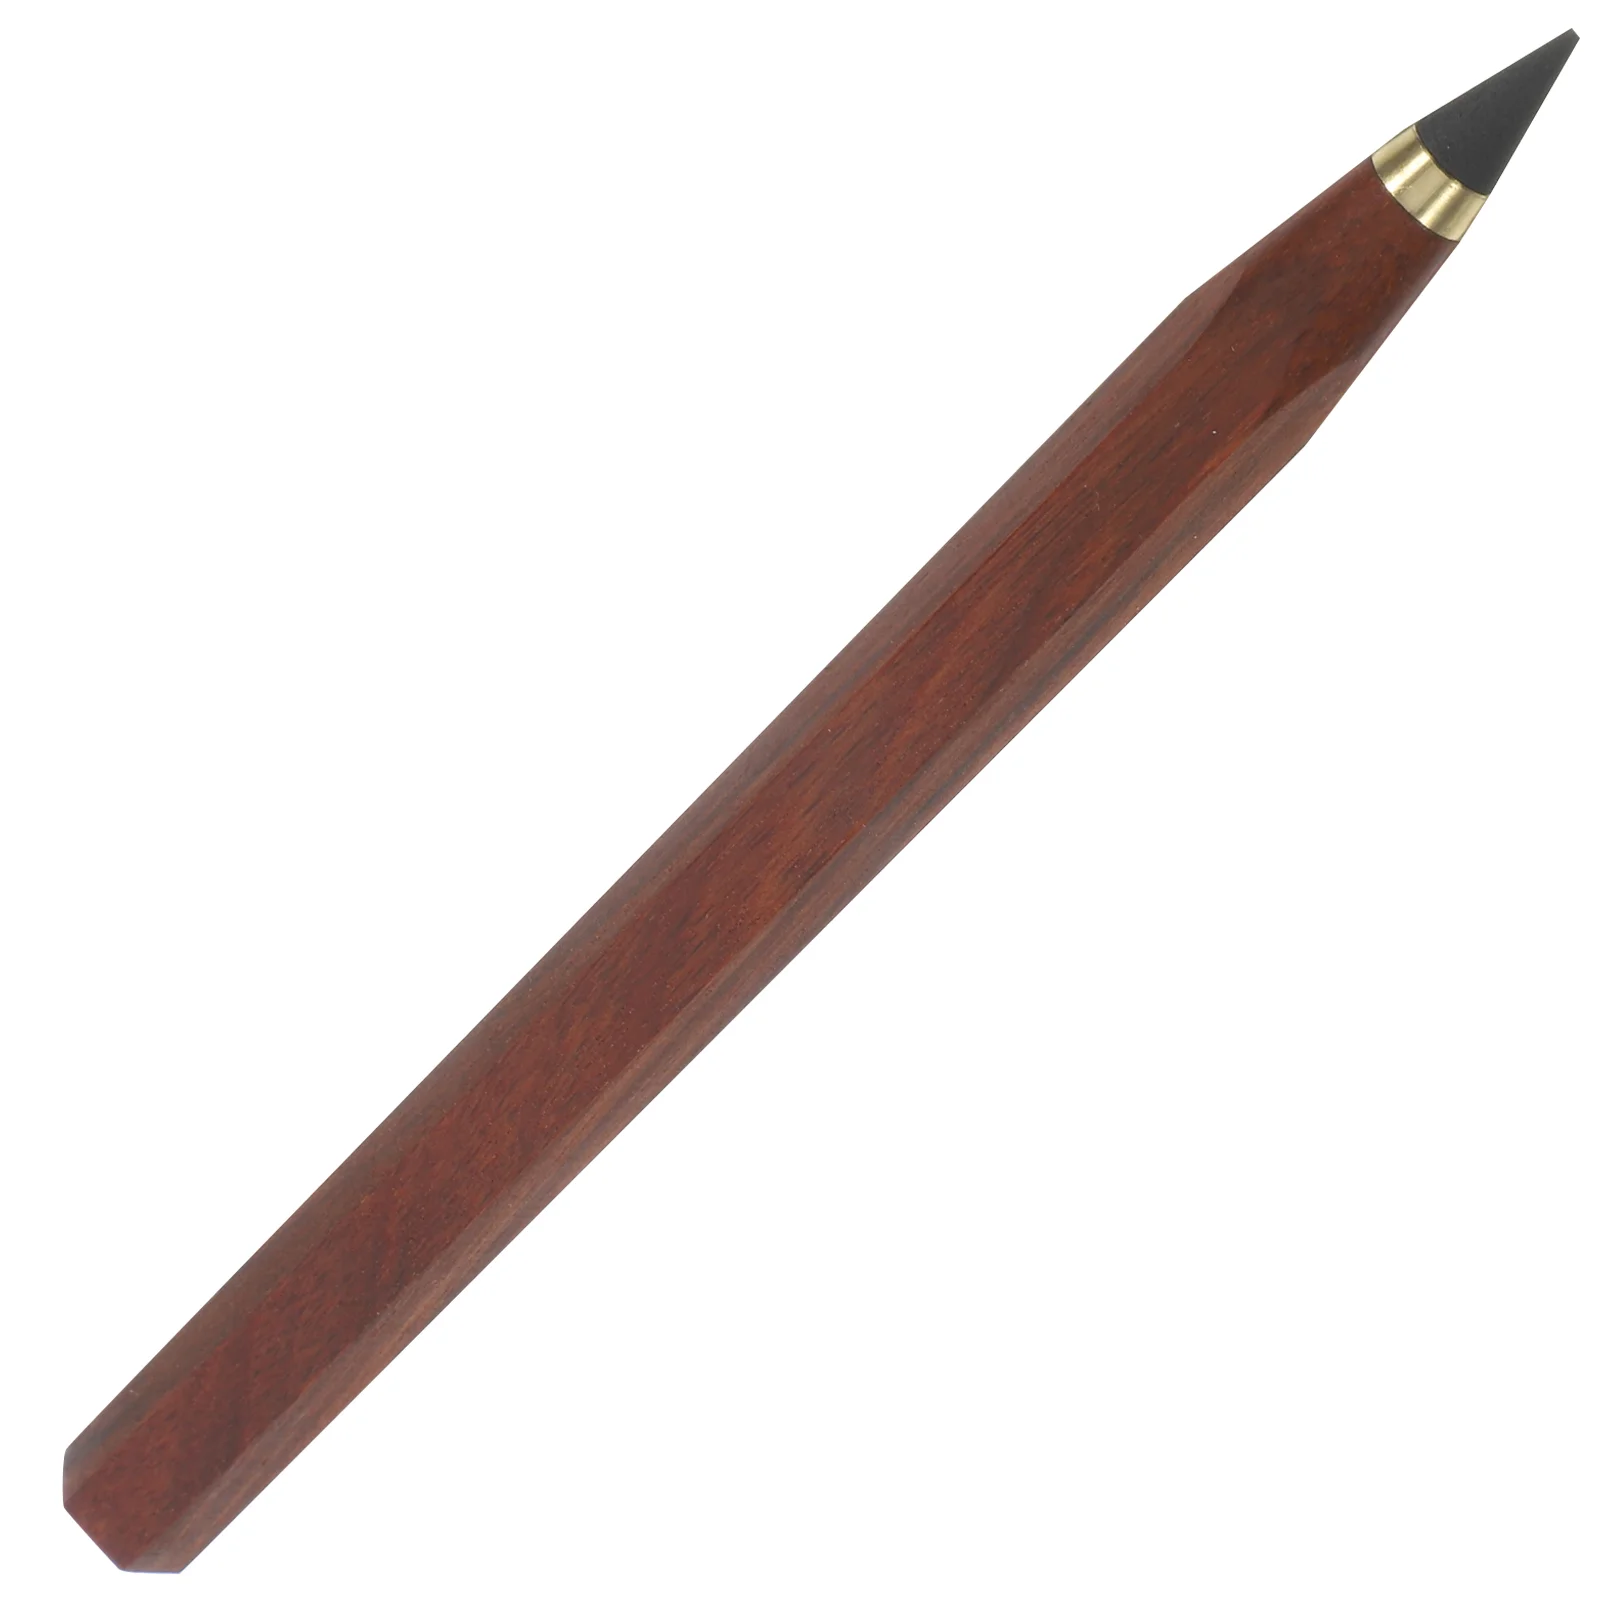 

Inkless Pencil Painting Everlasting Pencil Students Writing Pencil Wooden No Sharpening Pencil